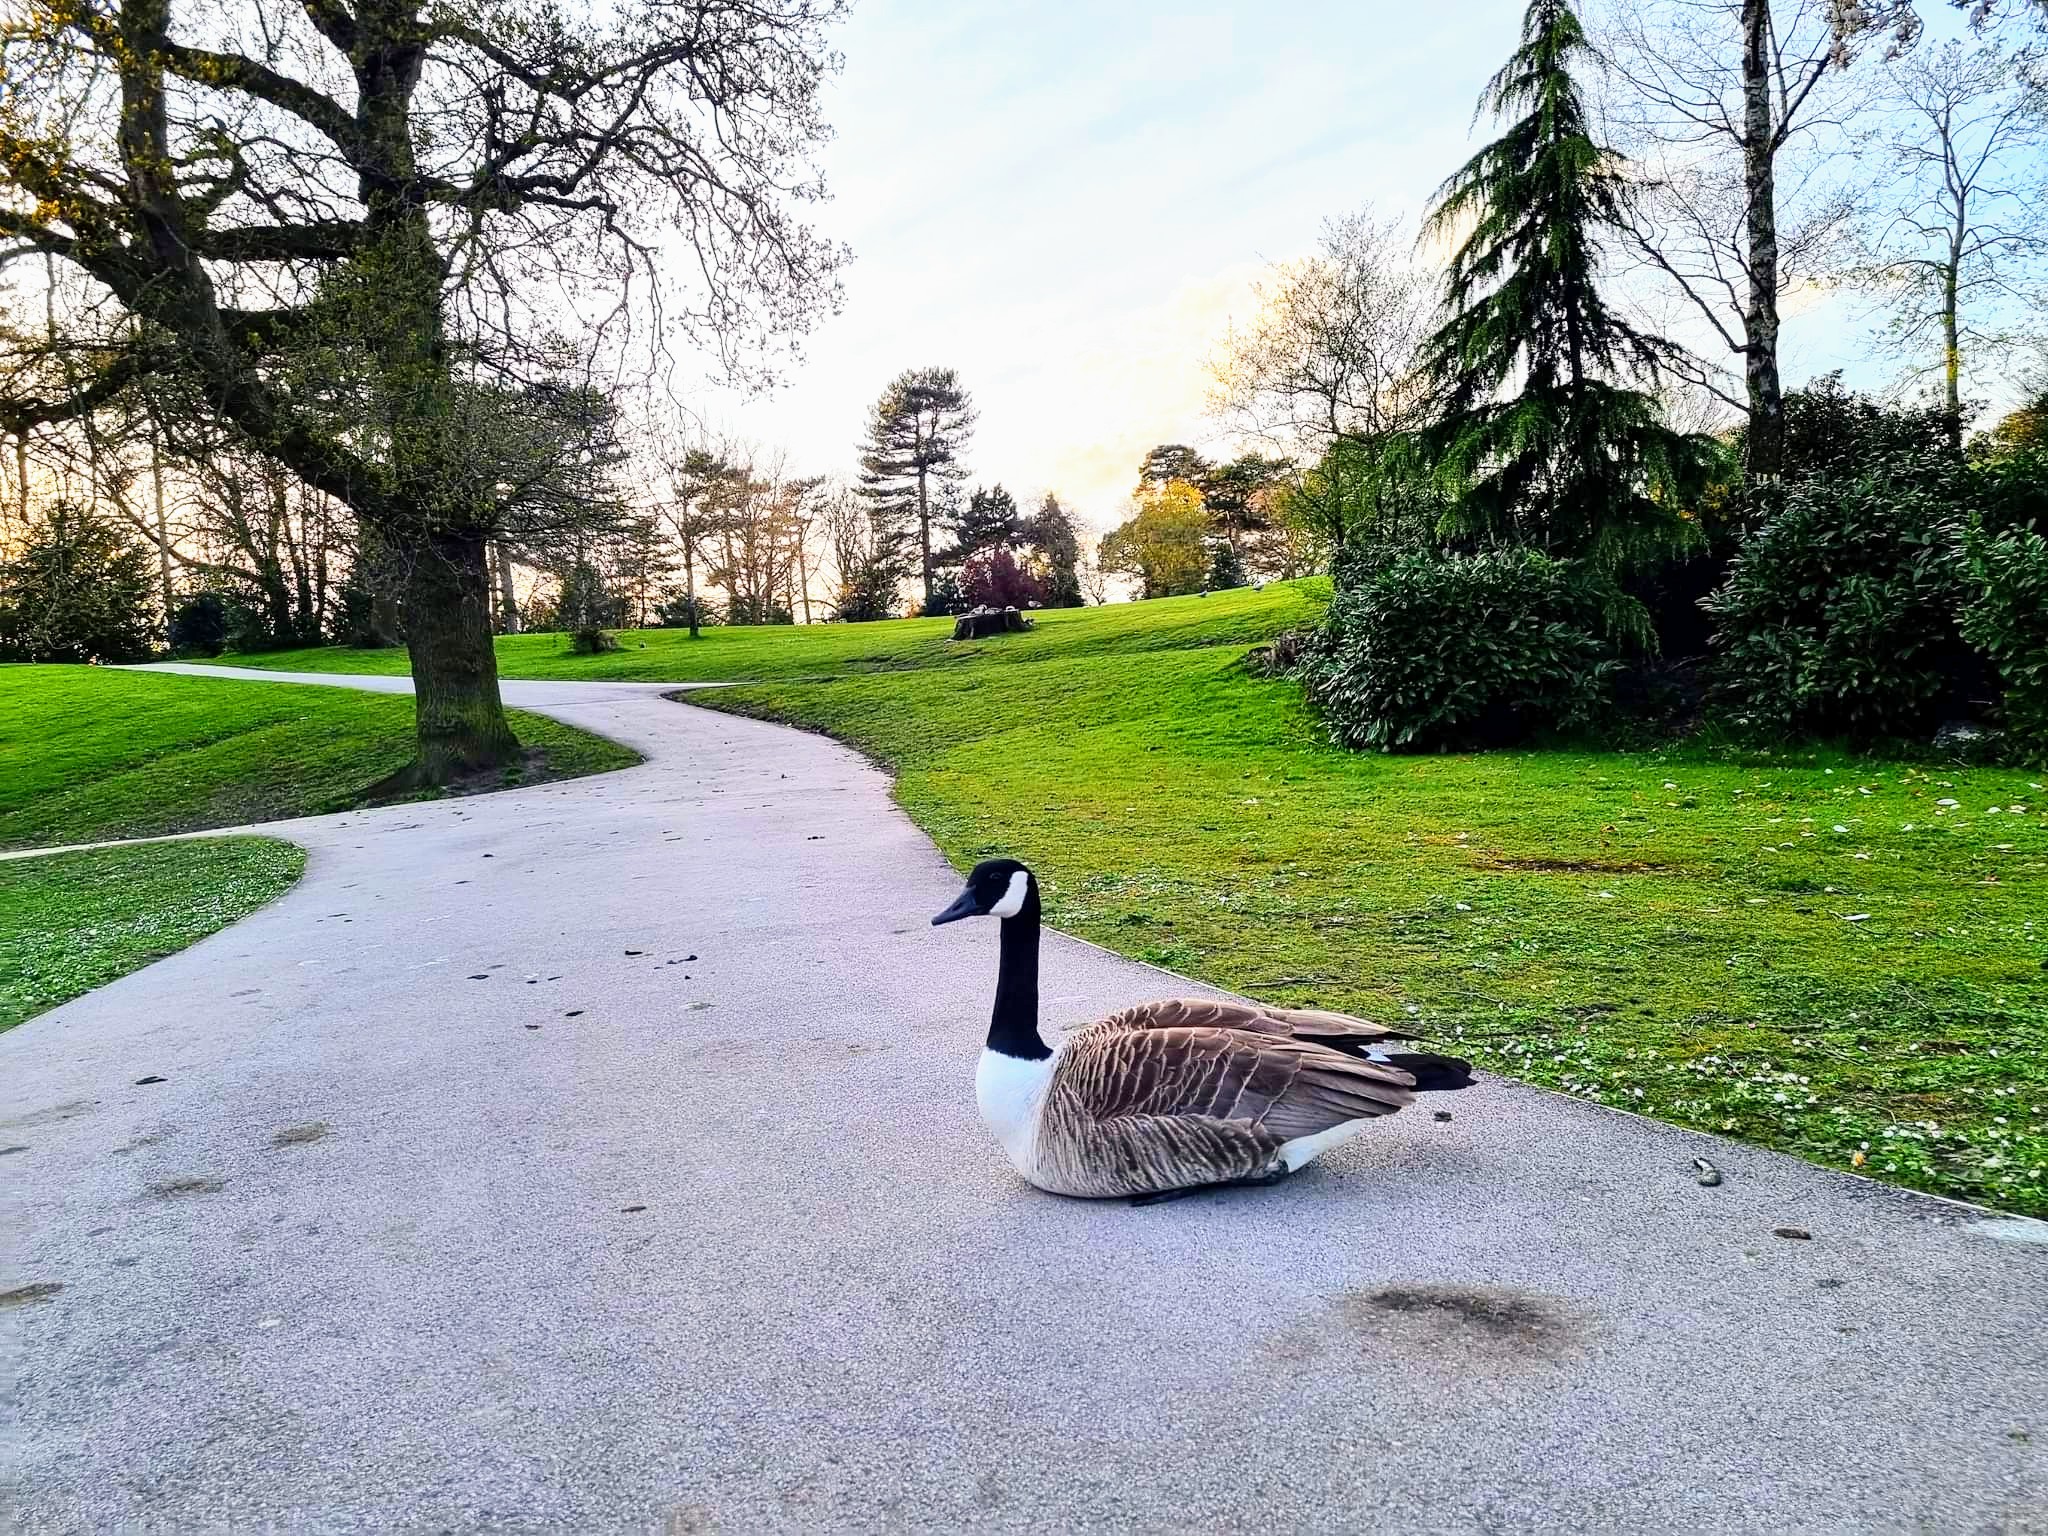 Queens Park was not affected an avian flu scare in the area (Alissa Cook-Gray).